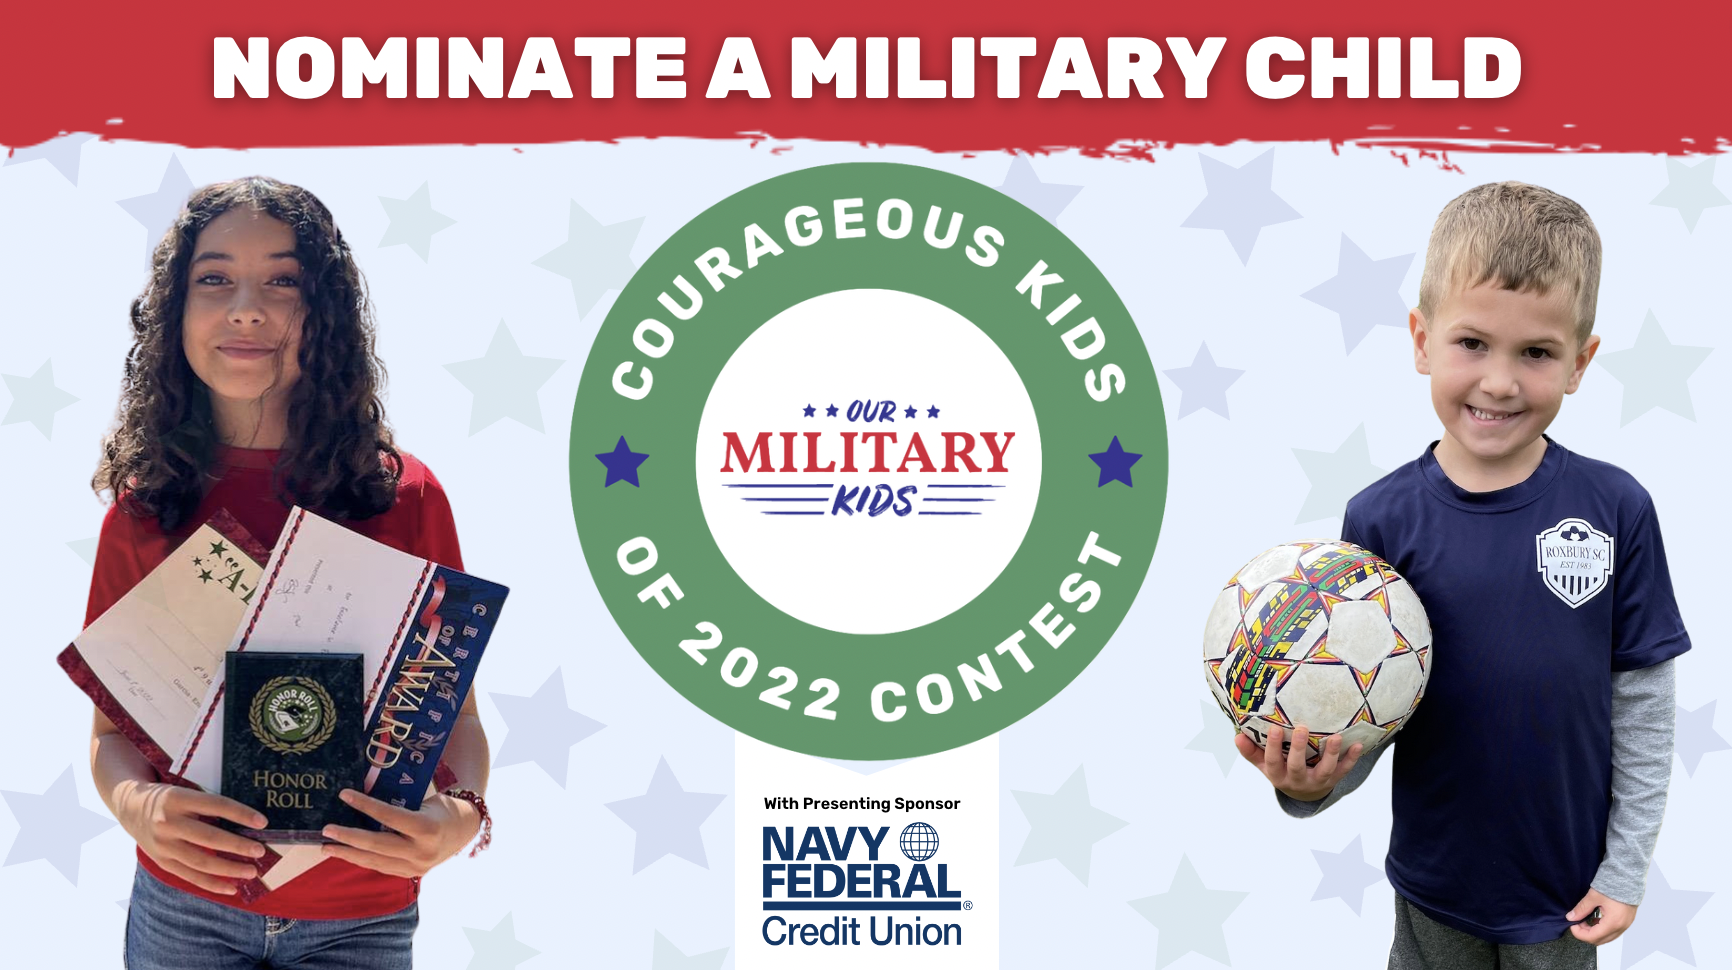 Through March 24, 2023, parents, teachers, coaches, and other community members may nominate a military child or teen (ages 3-18) who, in the past year, has had a parent deployed with the National Guard or Reserve, or in recovery from post-9/11, combat-related injuries for Our Military Kids' Courageous Kids Contest!